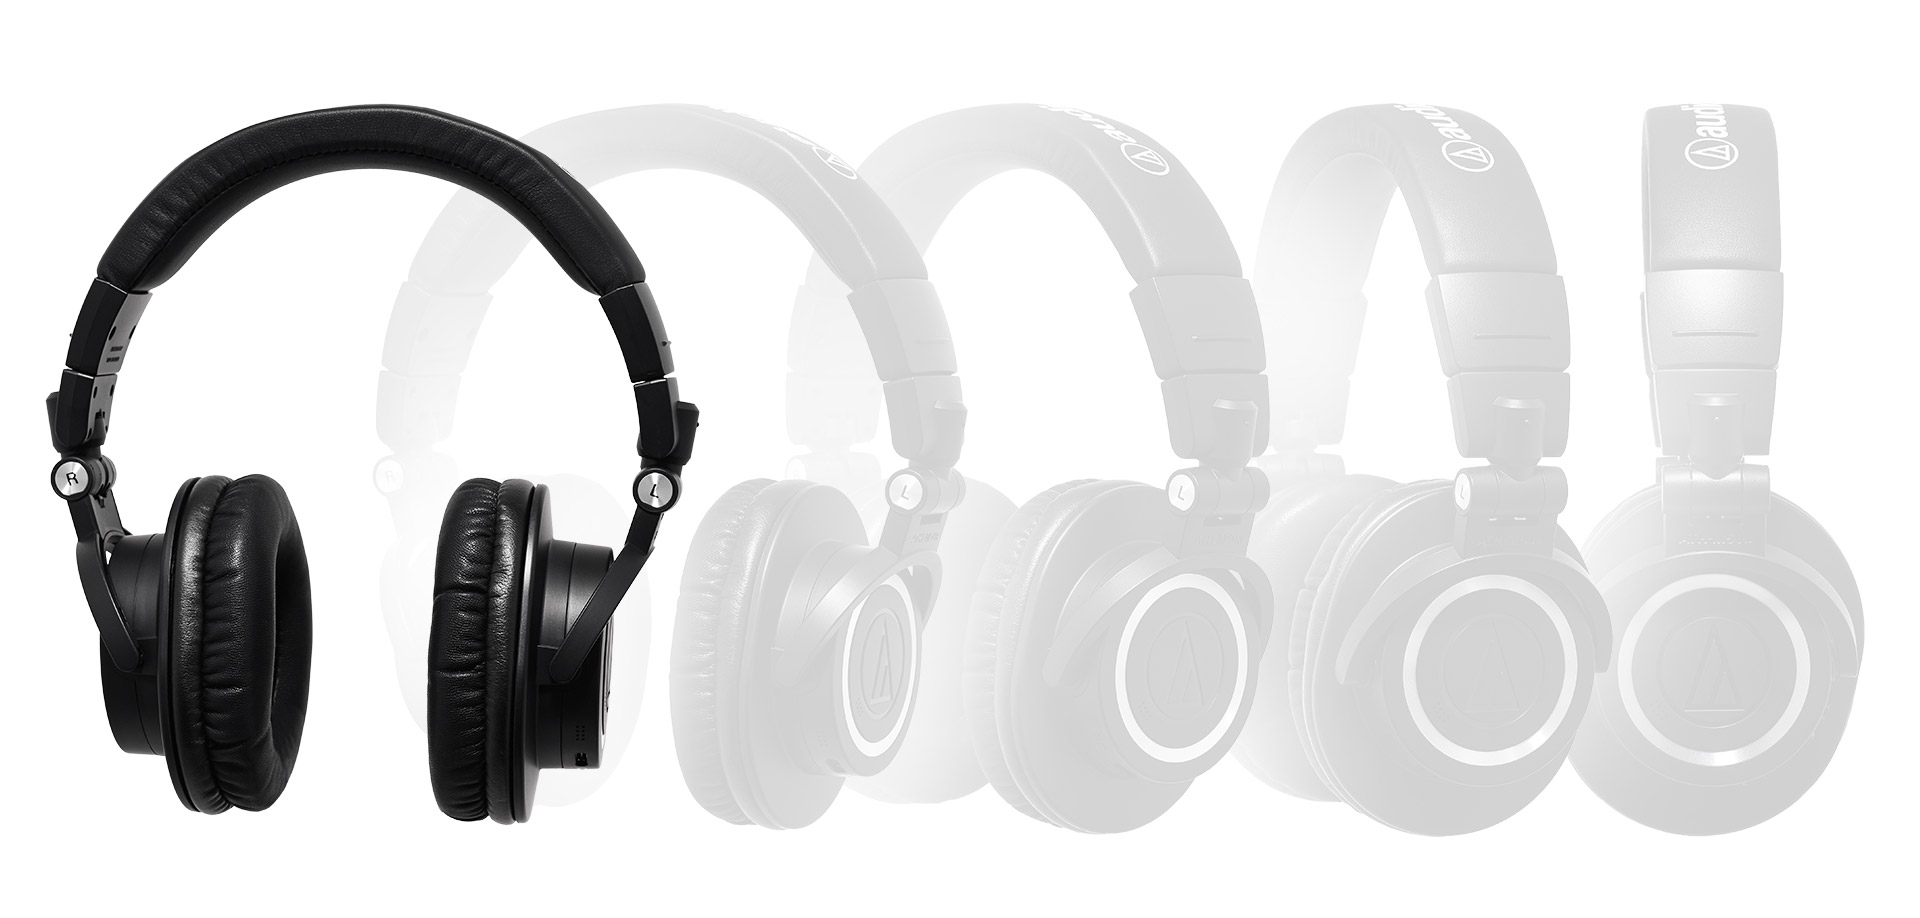 Impression of a 360 degrees Audio Technica headphones, with a front photo in full color, and after it, 4 other photos that show a gradual look, from front to side.